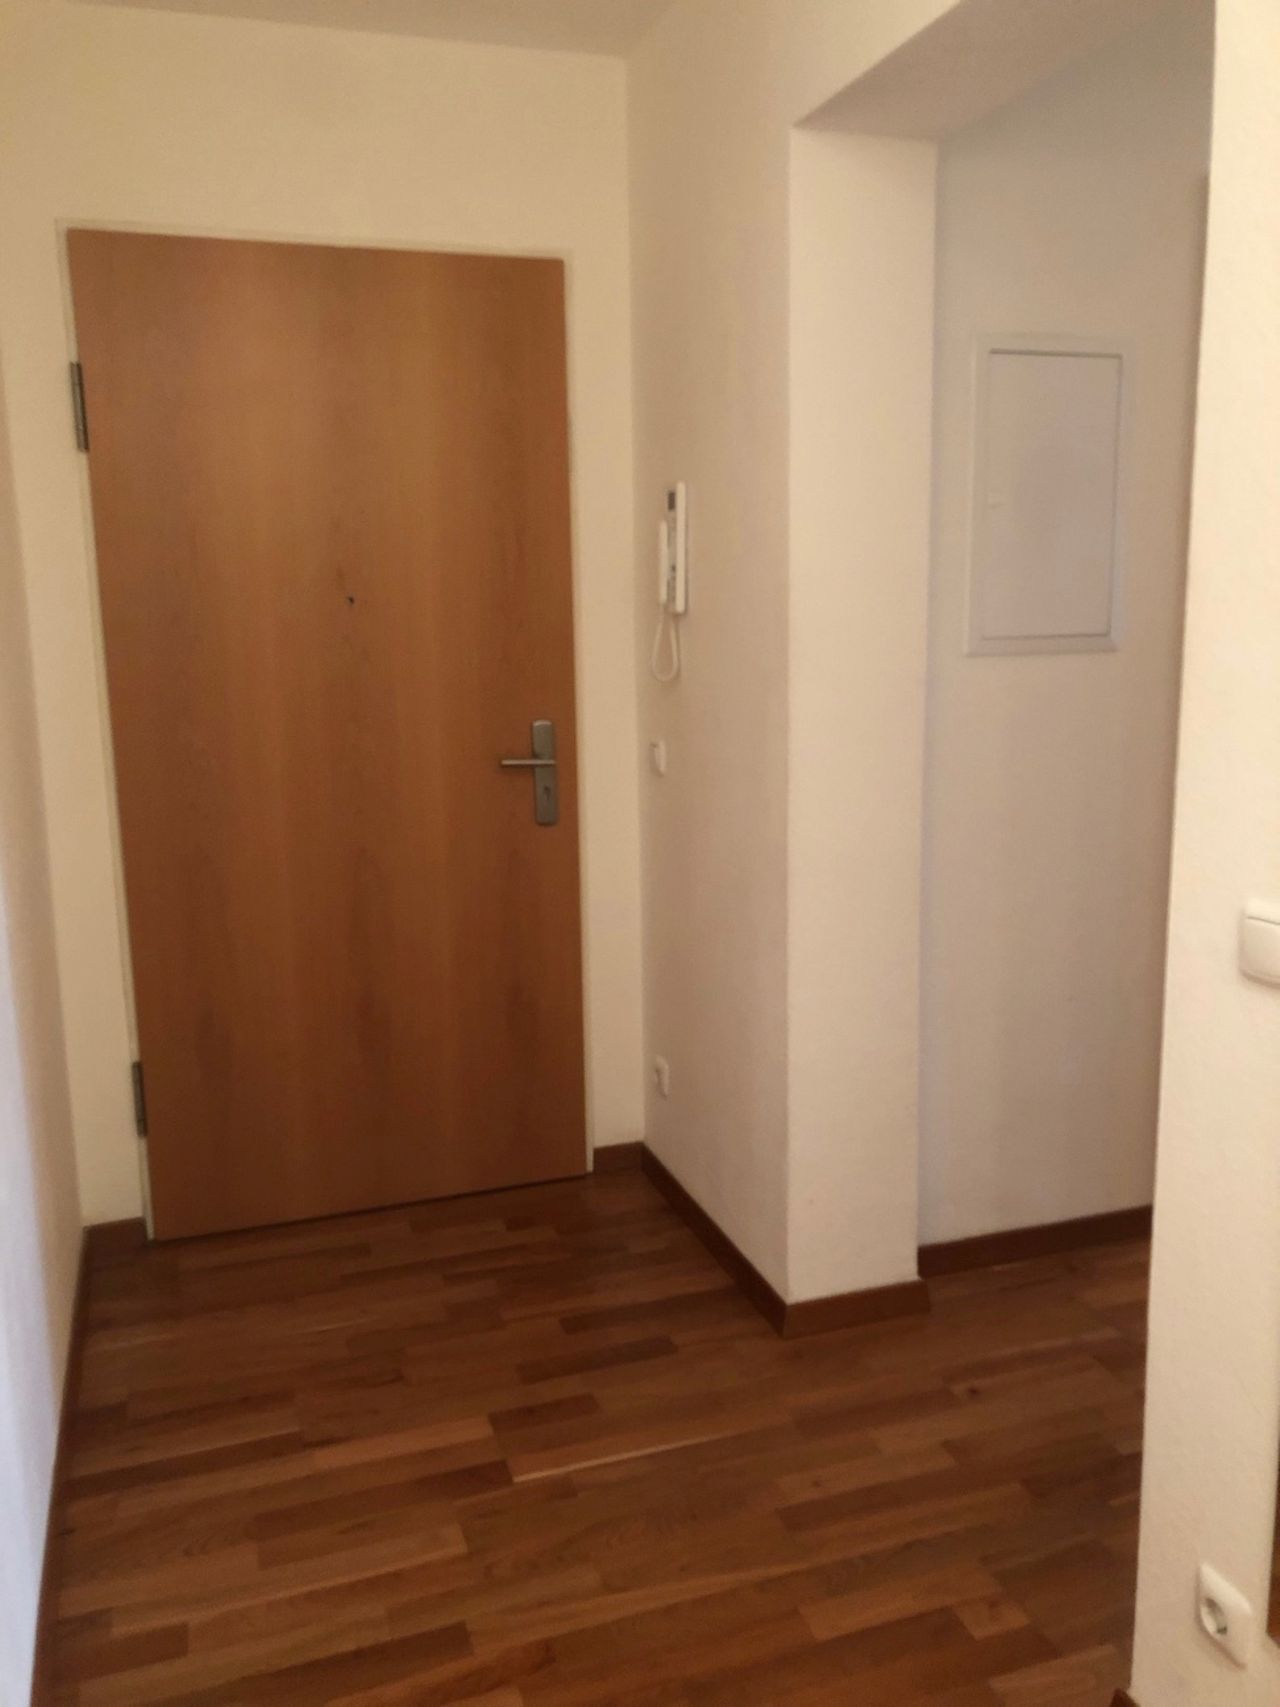 Gorgeous Apartment in a professional community of Frankfurt am Main